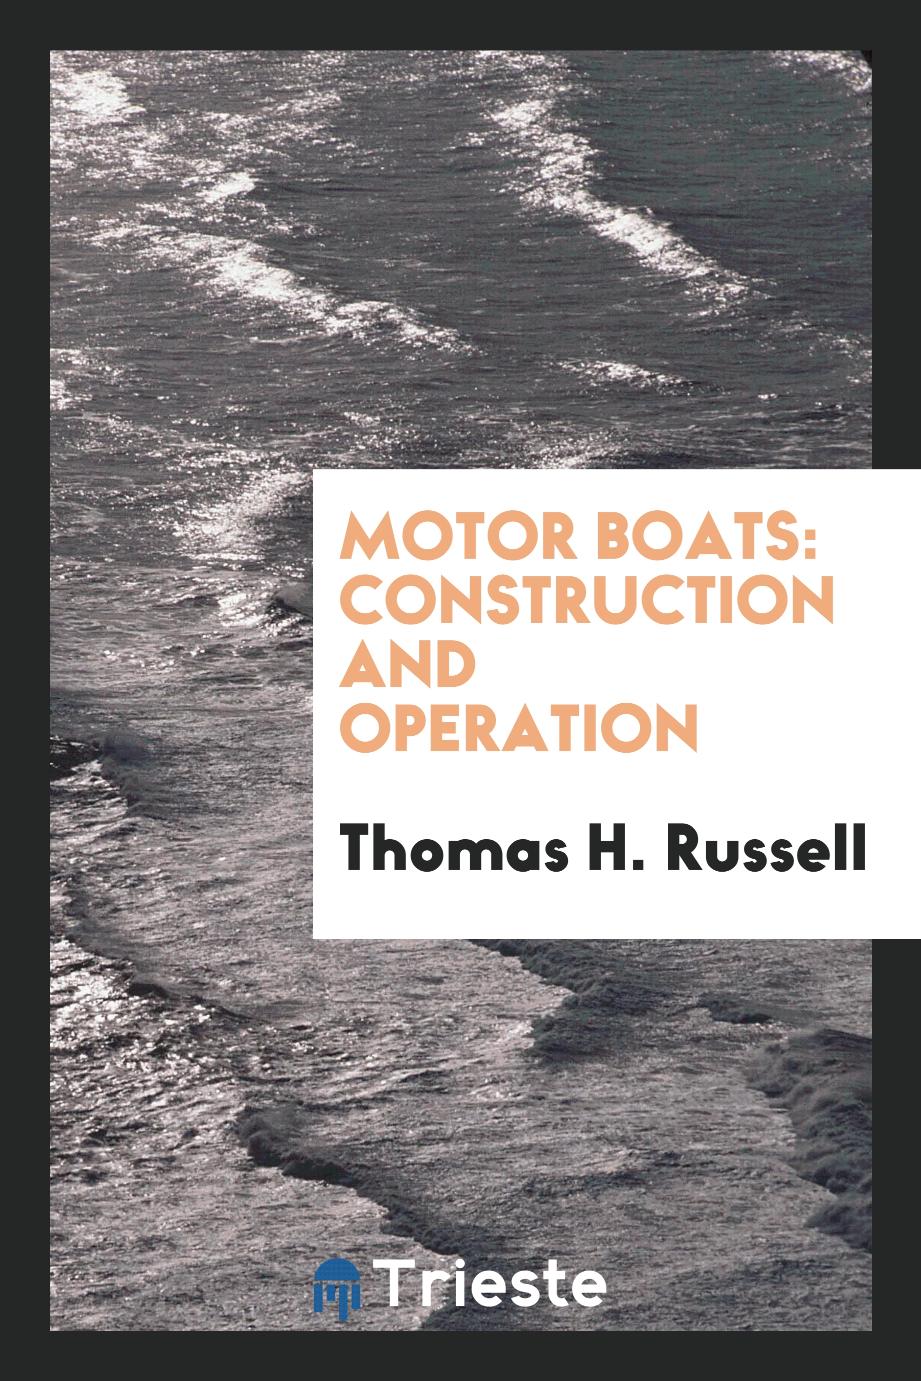 Motor Boats: Construction and Operation